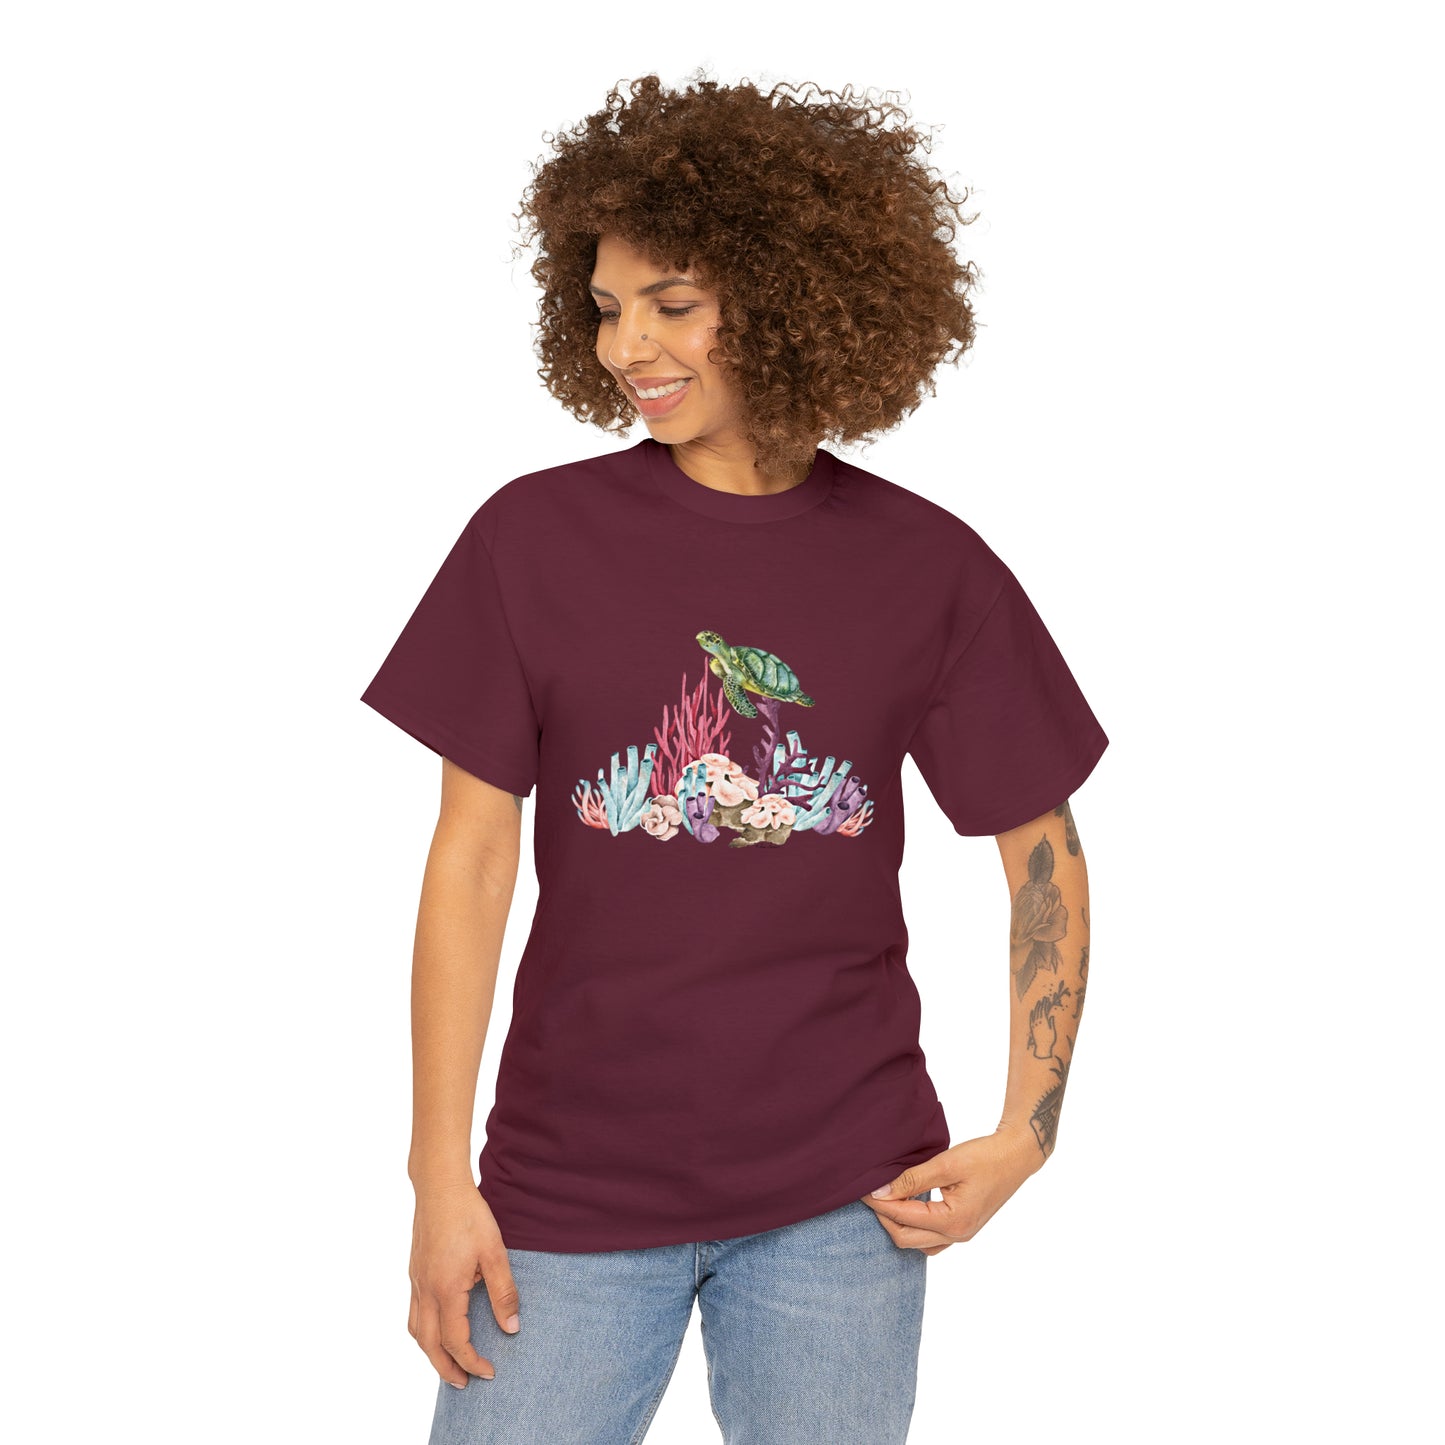 Mock up of a dark-haired woman wearing the Maroon shirt